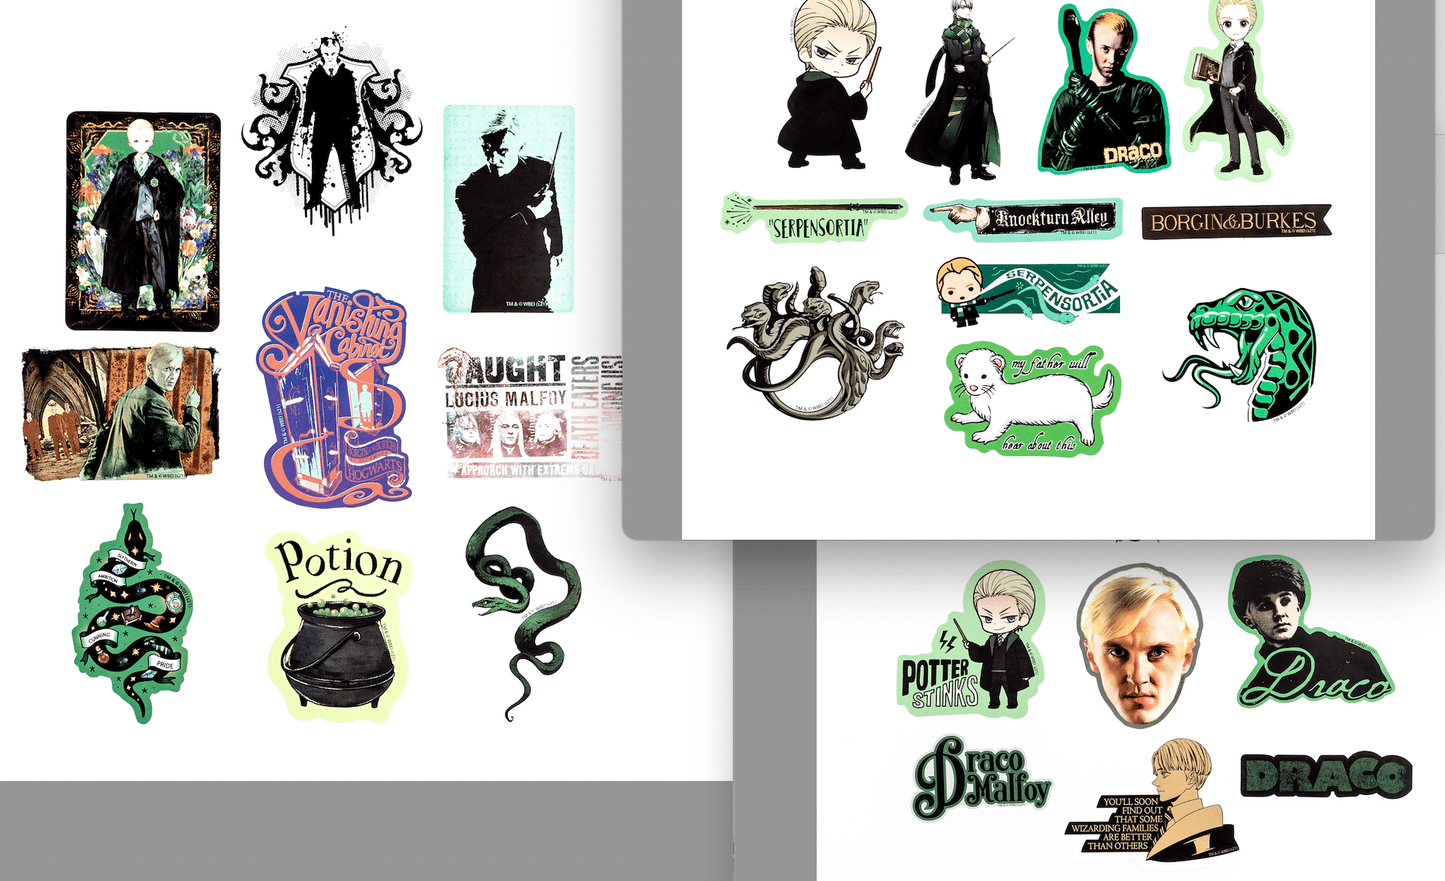 Harry Potter Draco Malfoy Decals (50-Pack)